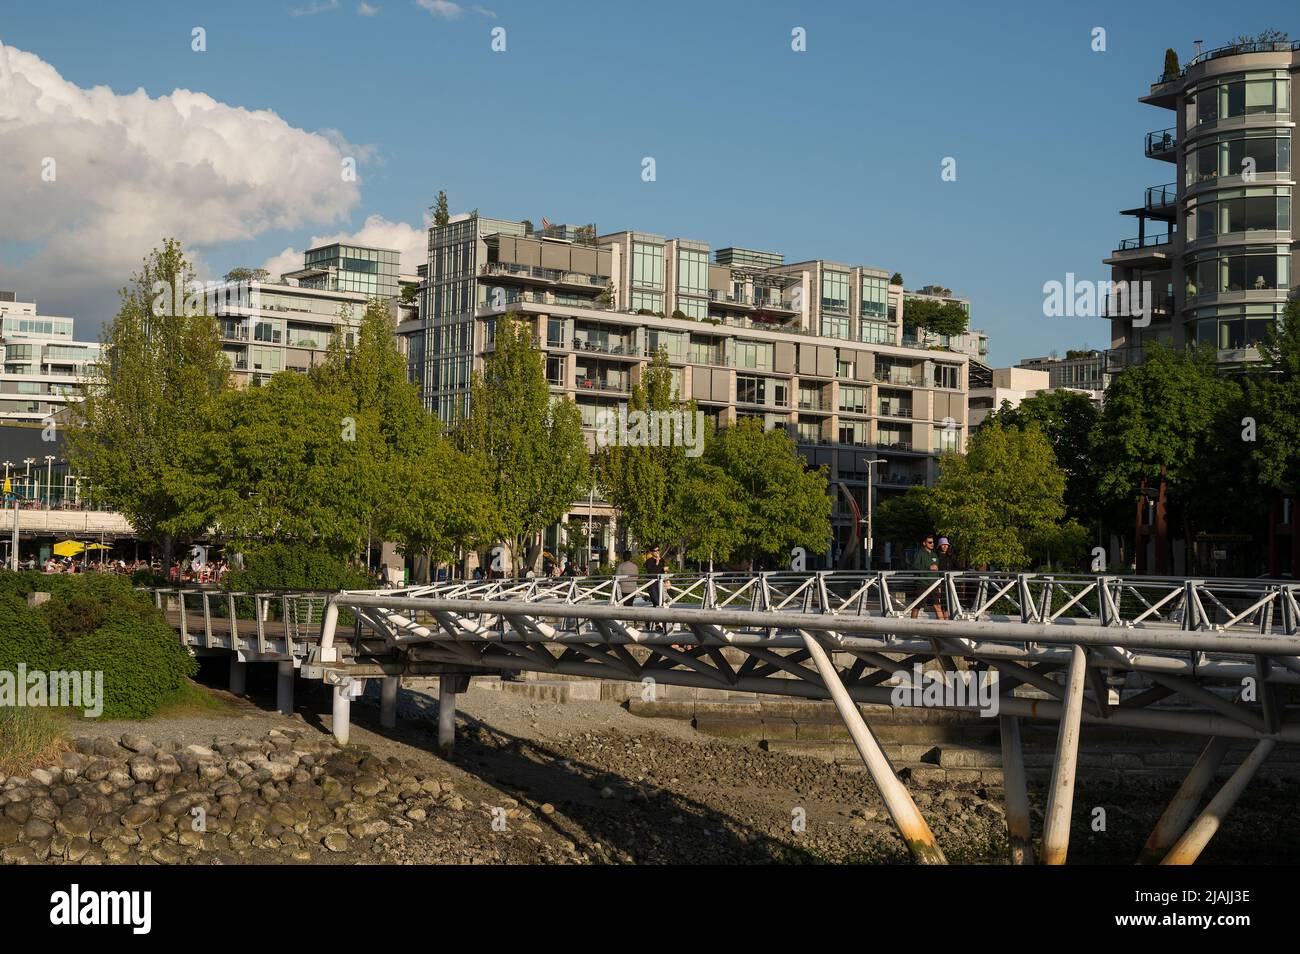 The Vancouver Olympic Village neighbourhood in the False Creek area of Vancouver BC, Canada. Stock Photo